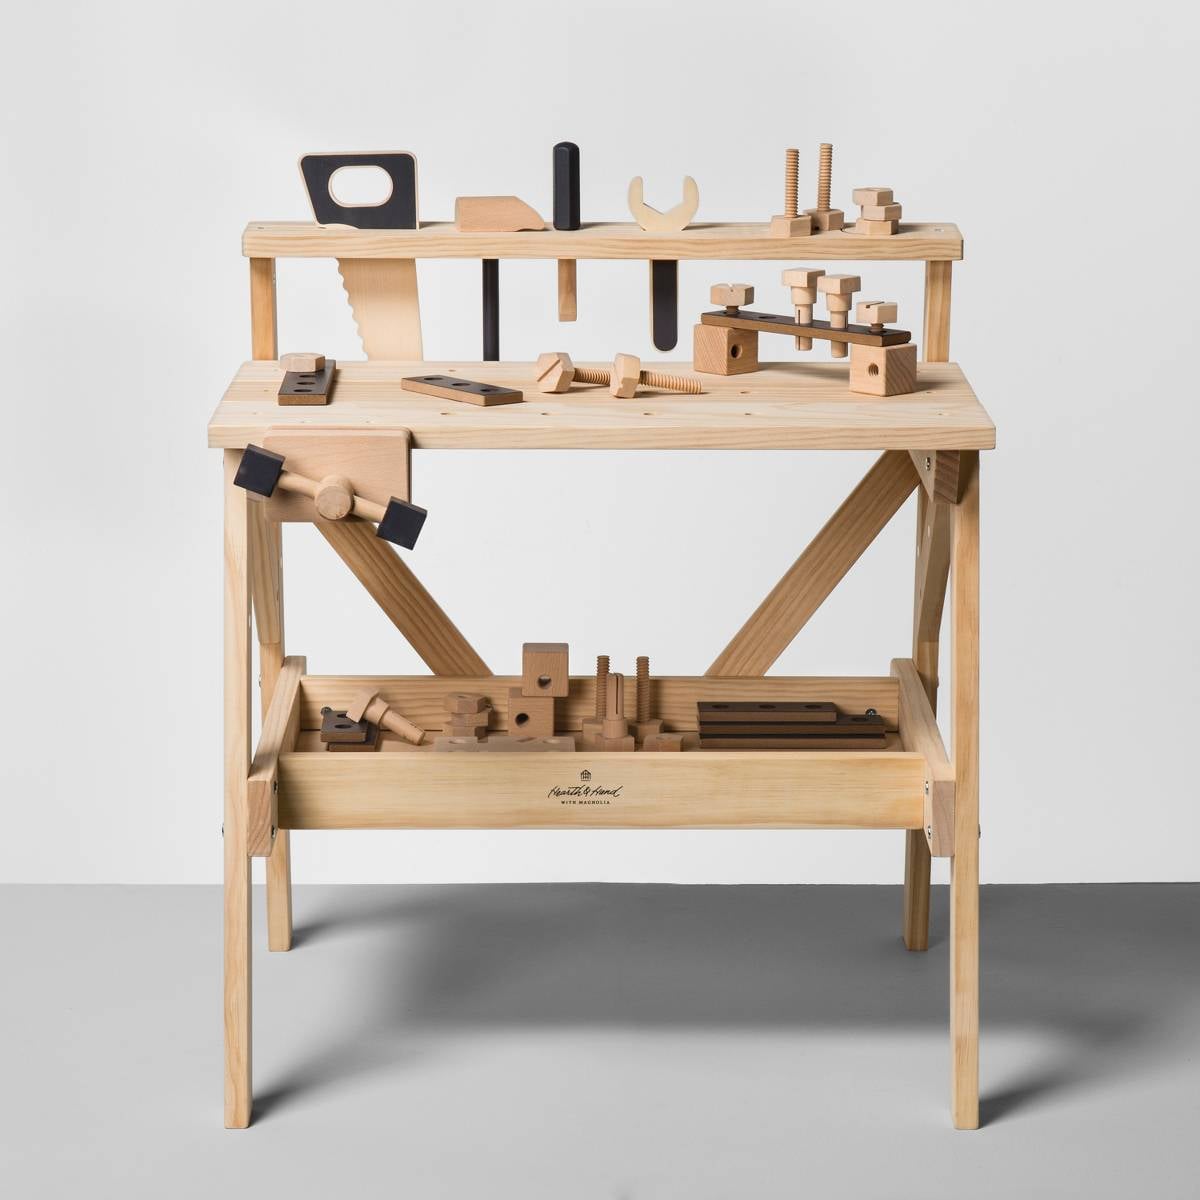 With Magnolia Wooden Toy Tool Bench 